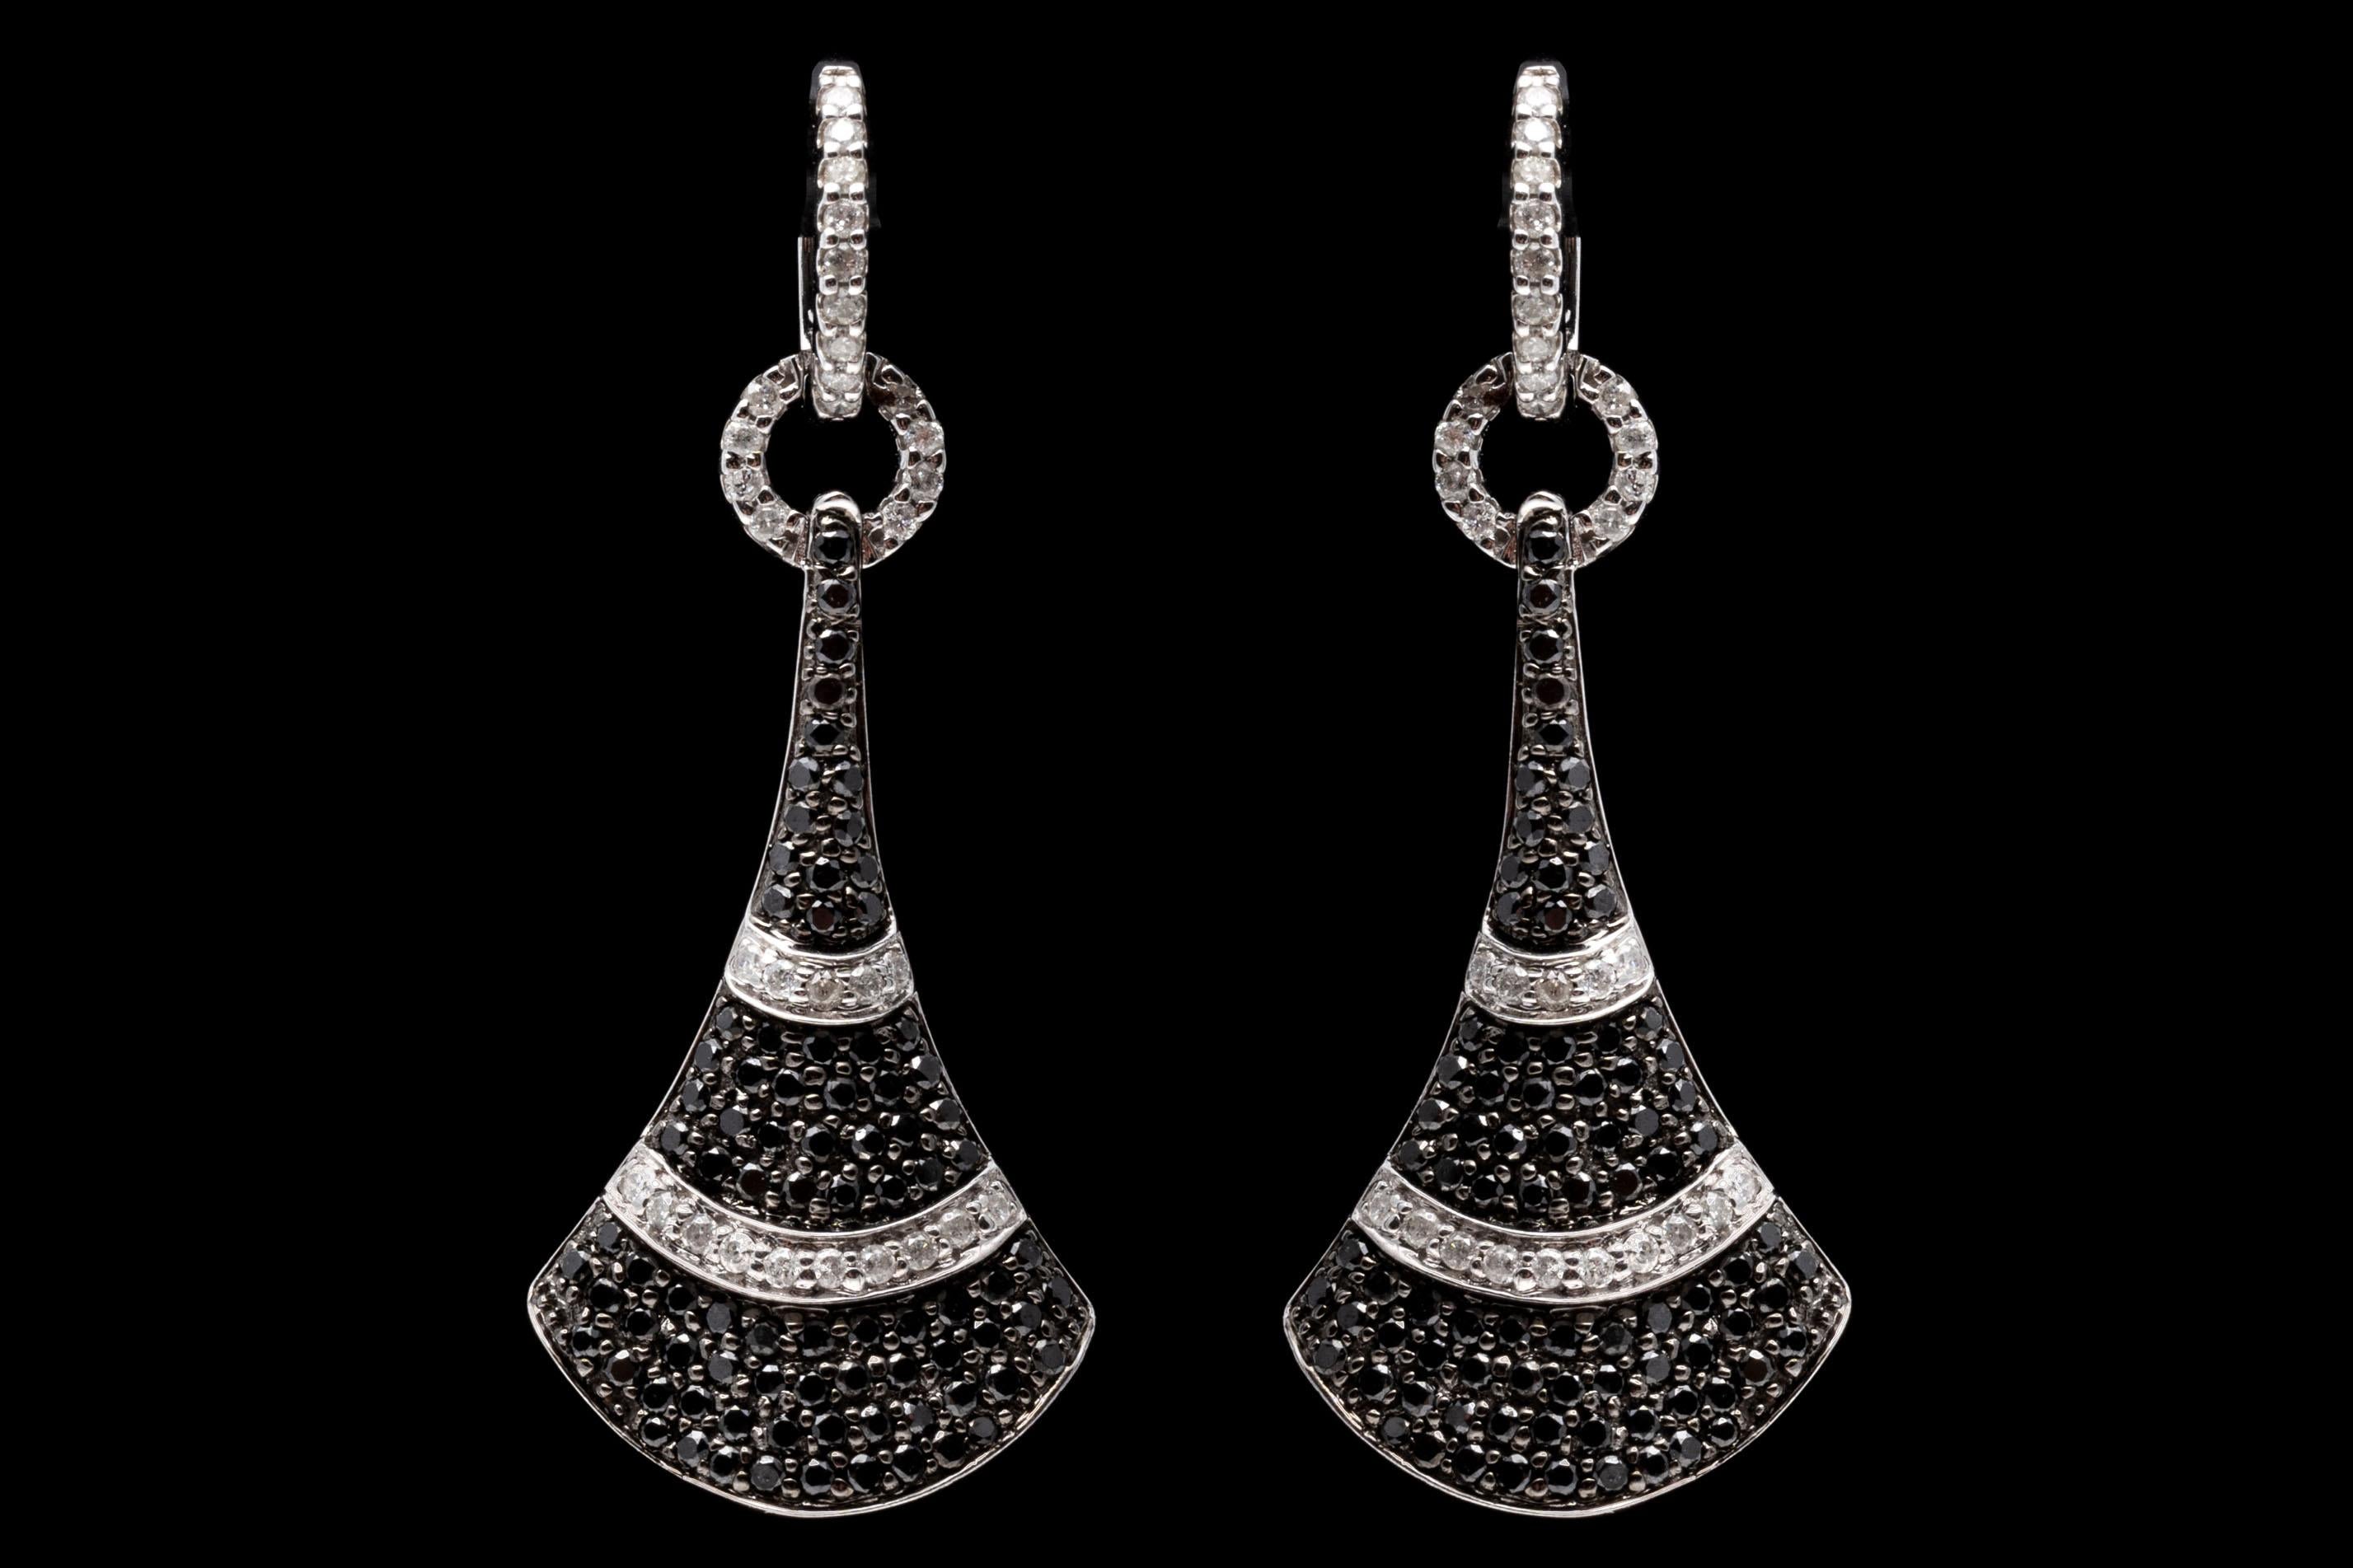 14K white gold and diamond earrings. The flare shaped pendant of these striking earrings is set with black diamond contrasted by two horizontal bands of white diamonds. Approximately 1.94 TCW of diamonds creates a brilliant shimmer. Post and leaver